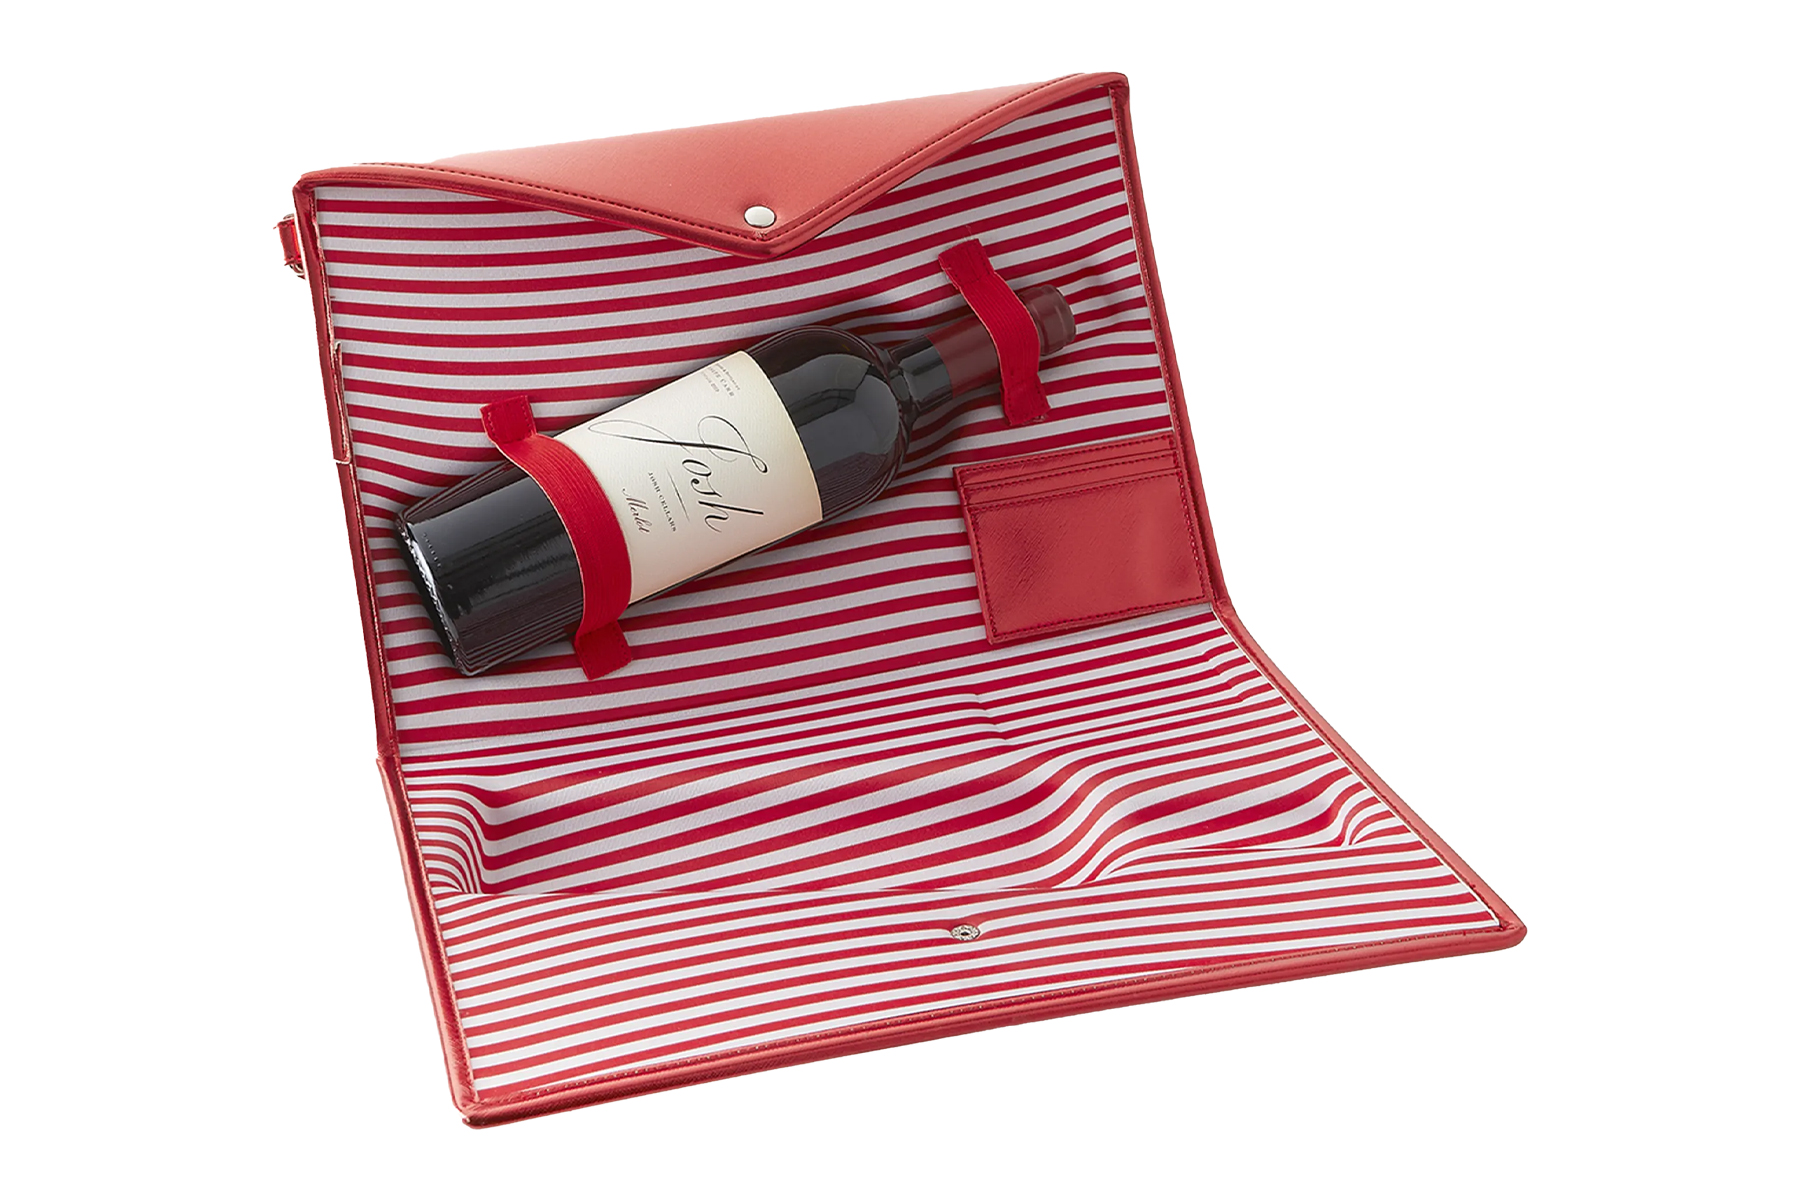 Wine Bottle Carrying Clutch Bag from Neiman Marcus